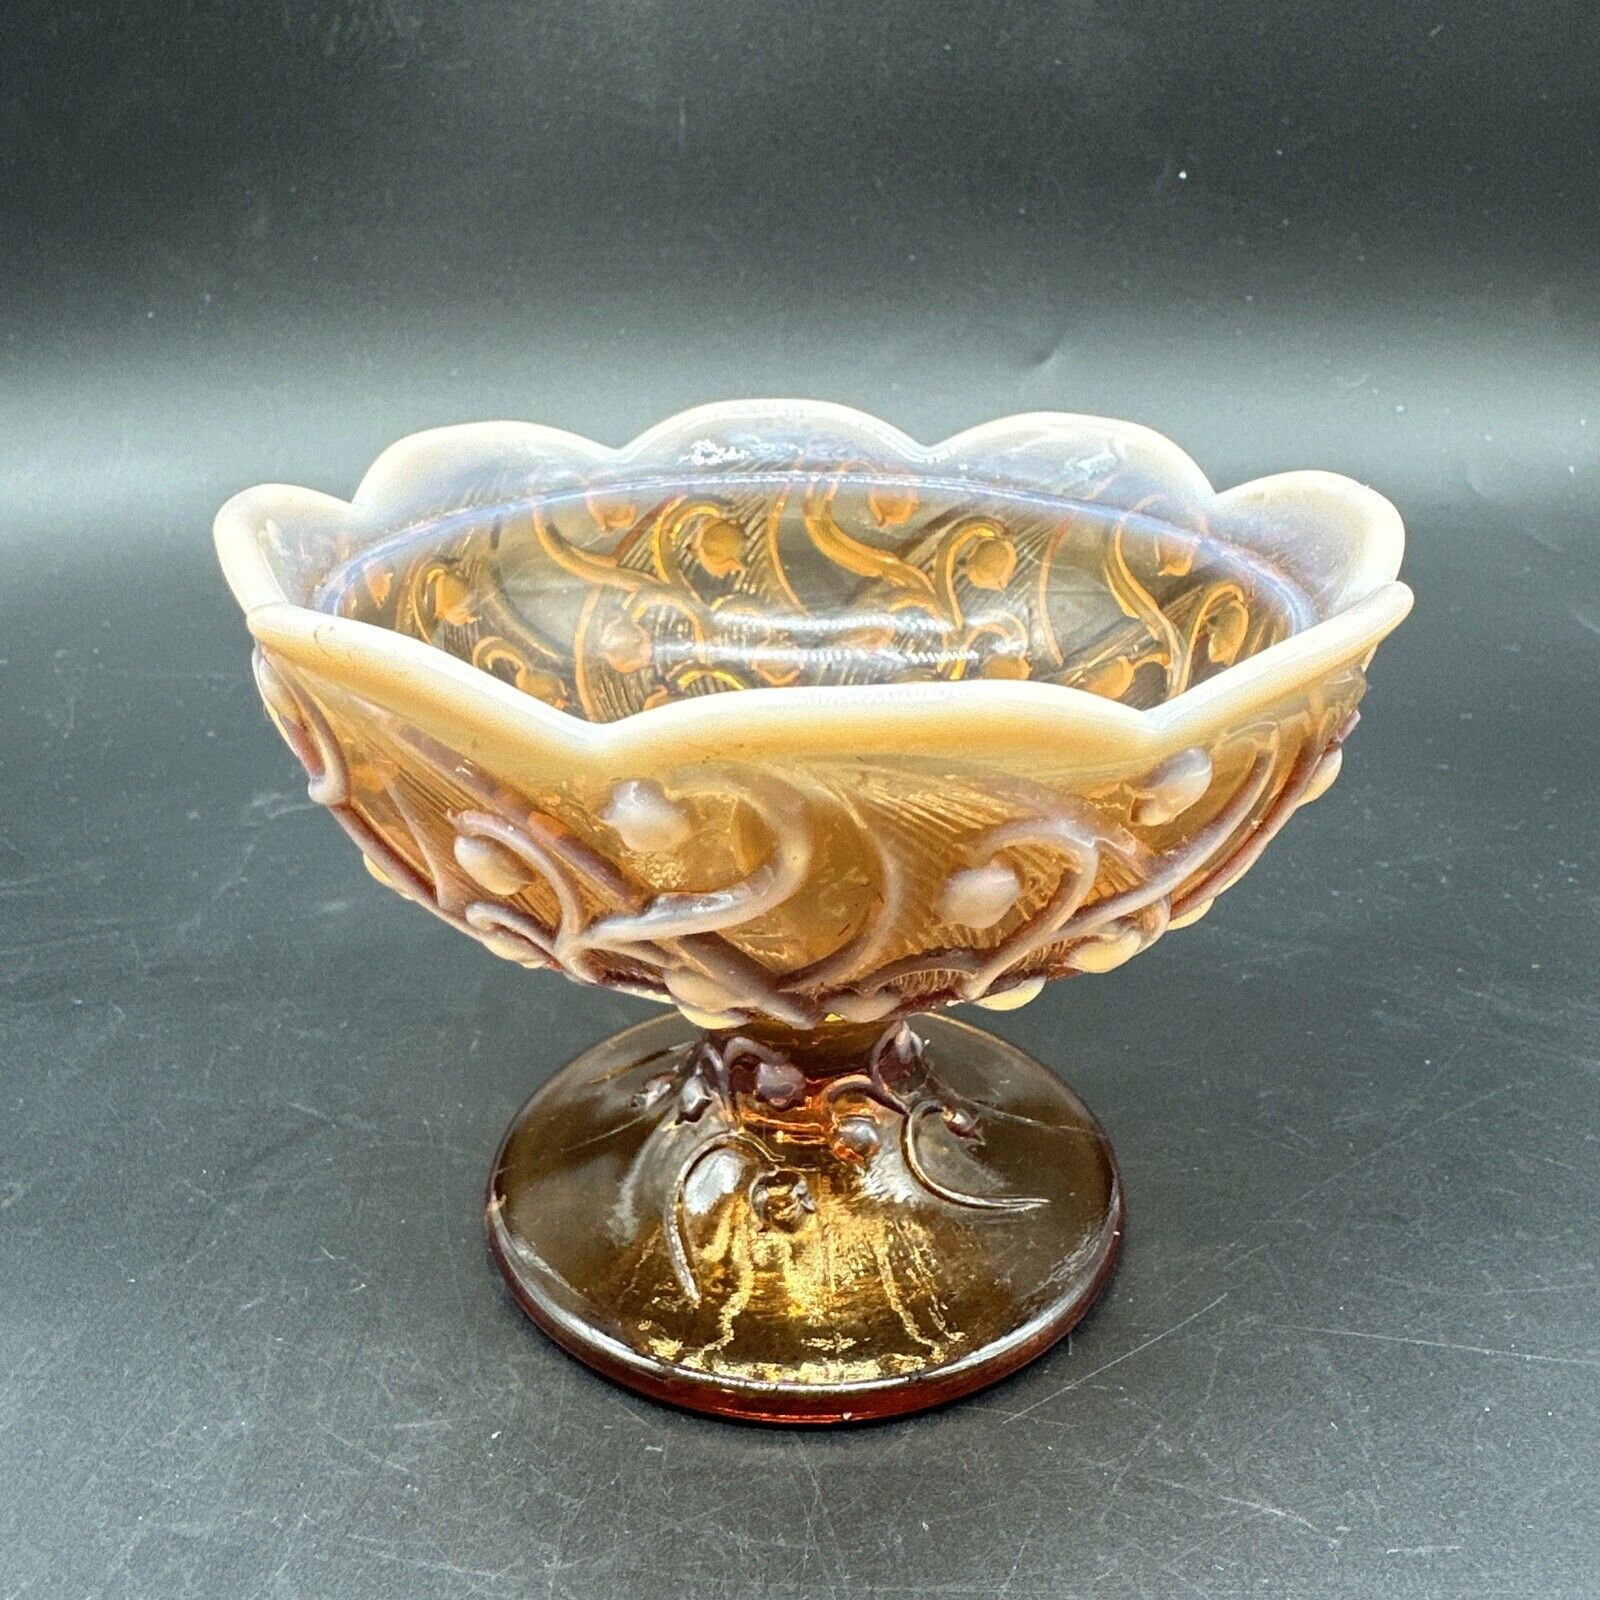 Fenton Glass Amber Opalescent Tulip Water Lily Compote 3 1/2